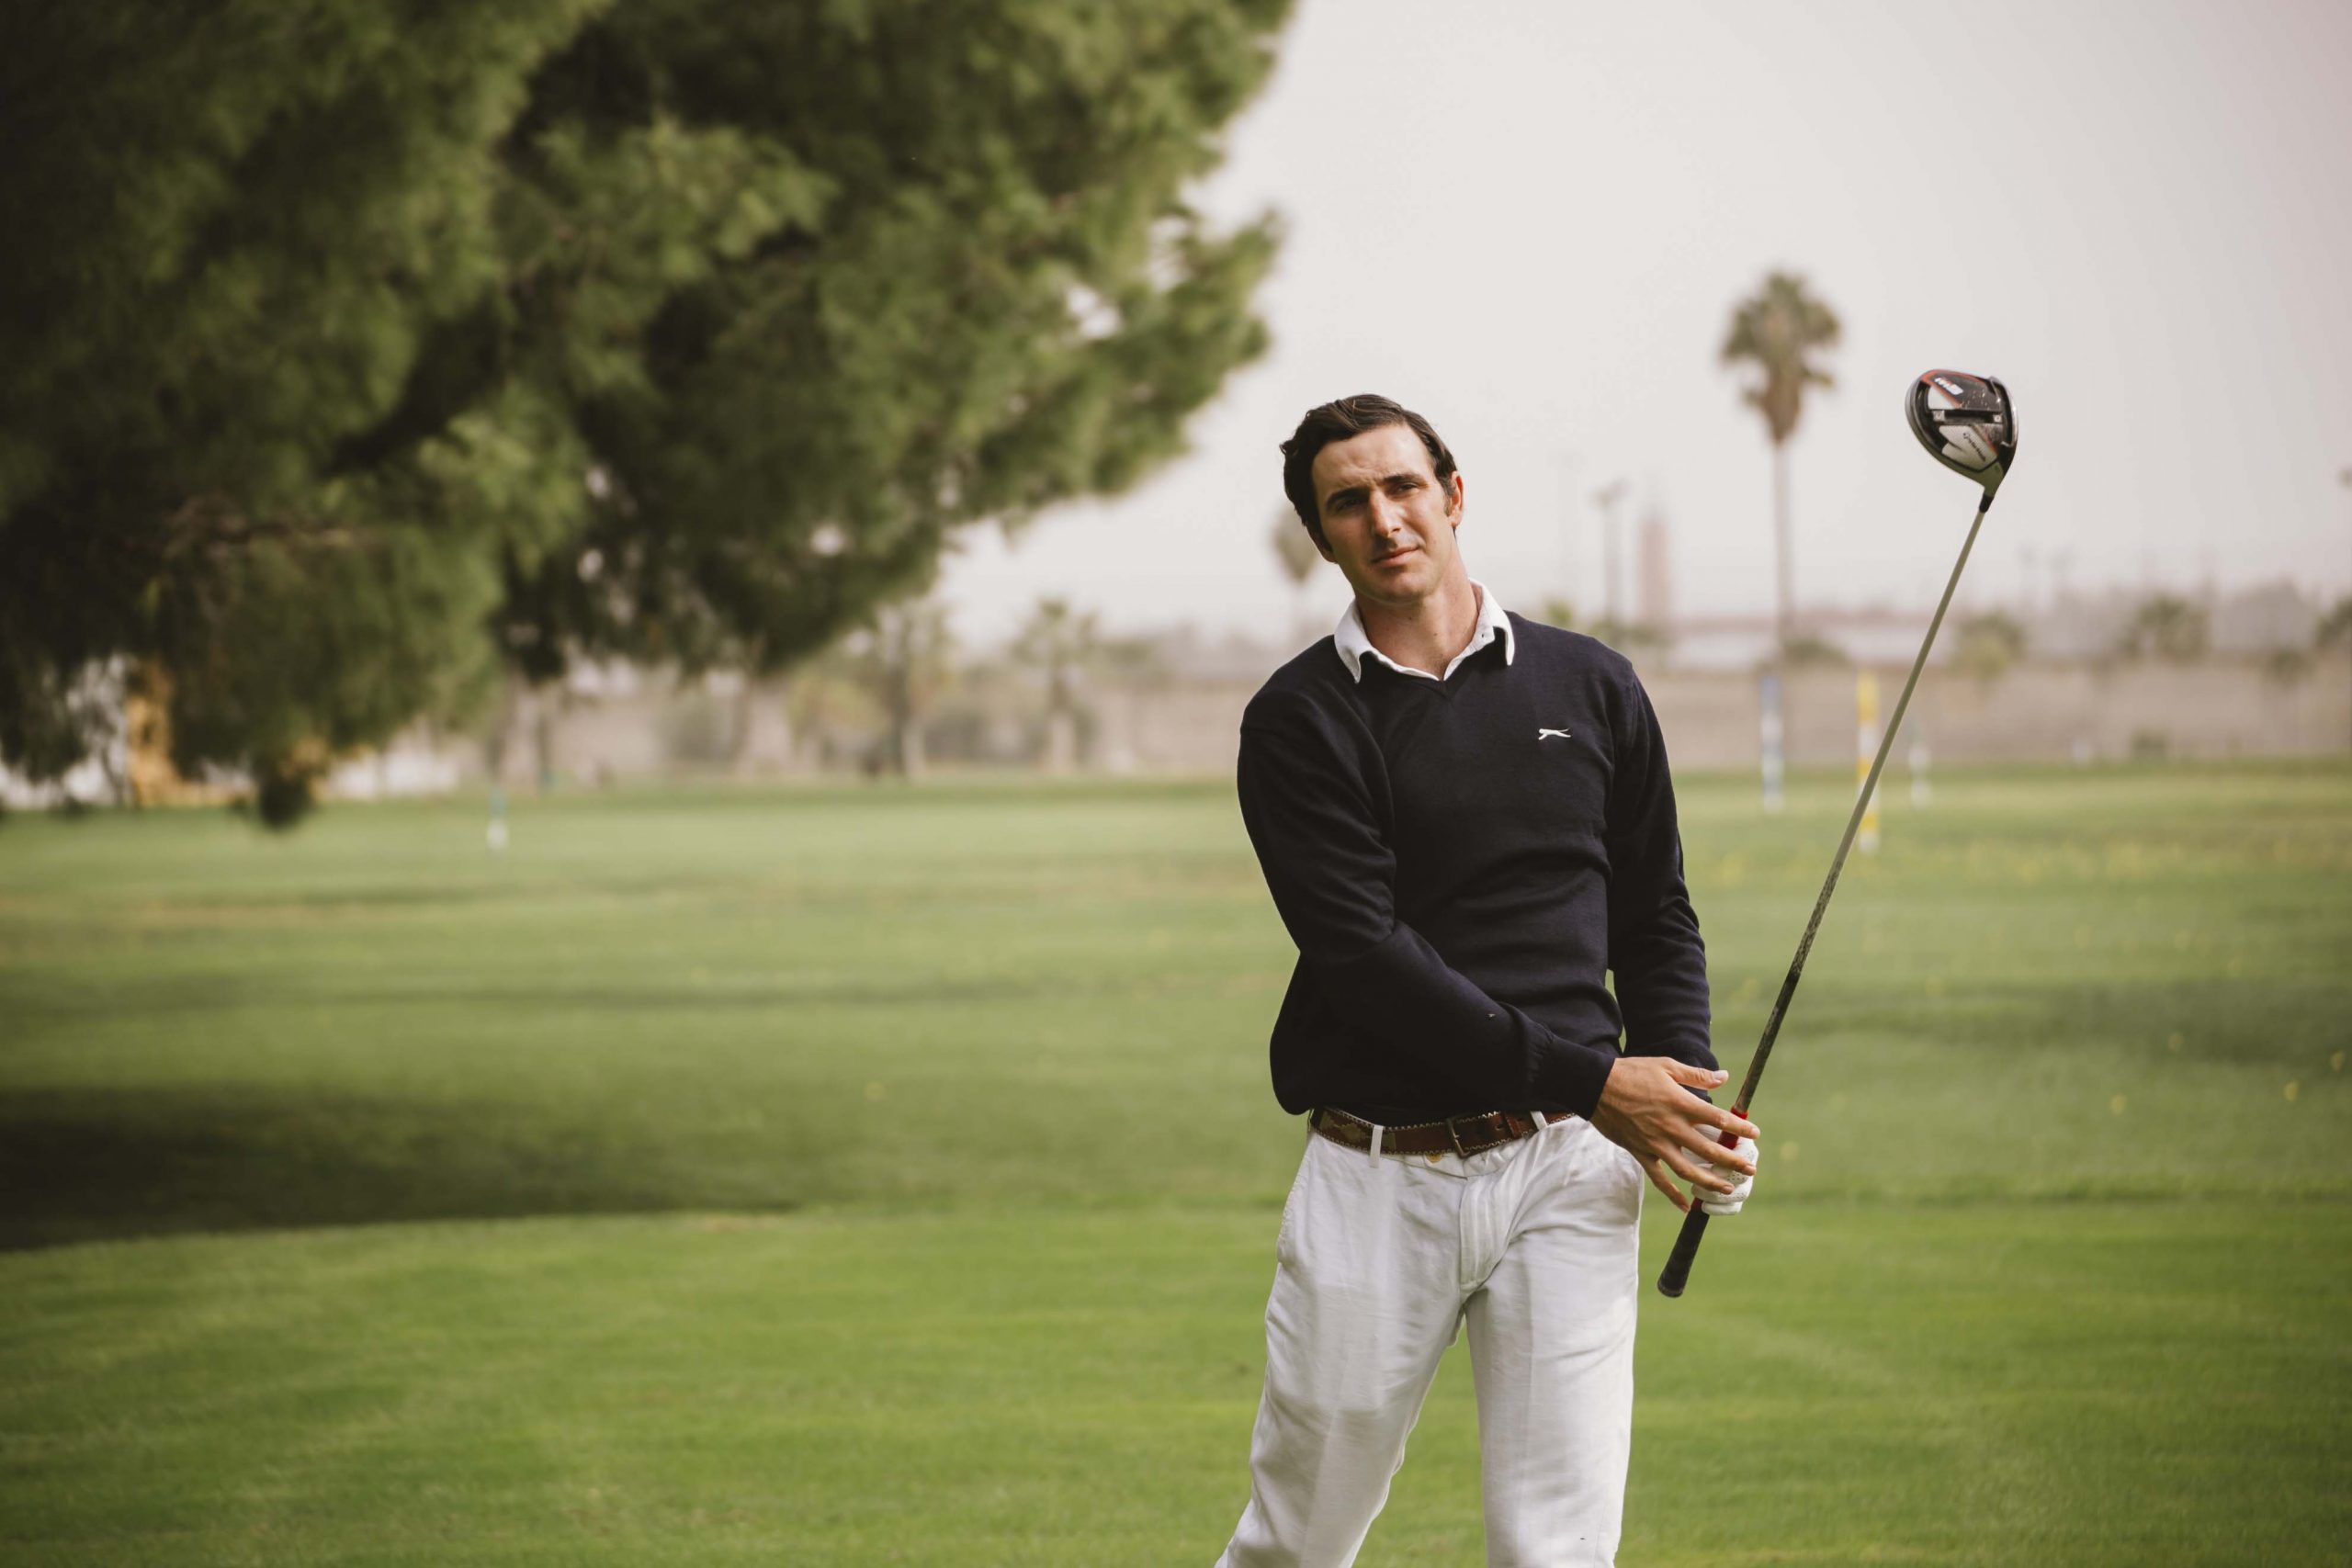 OOTD (outfit of the day) for golfers with style - Slazenger Heritage